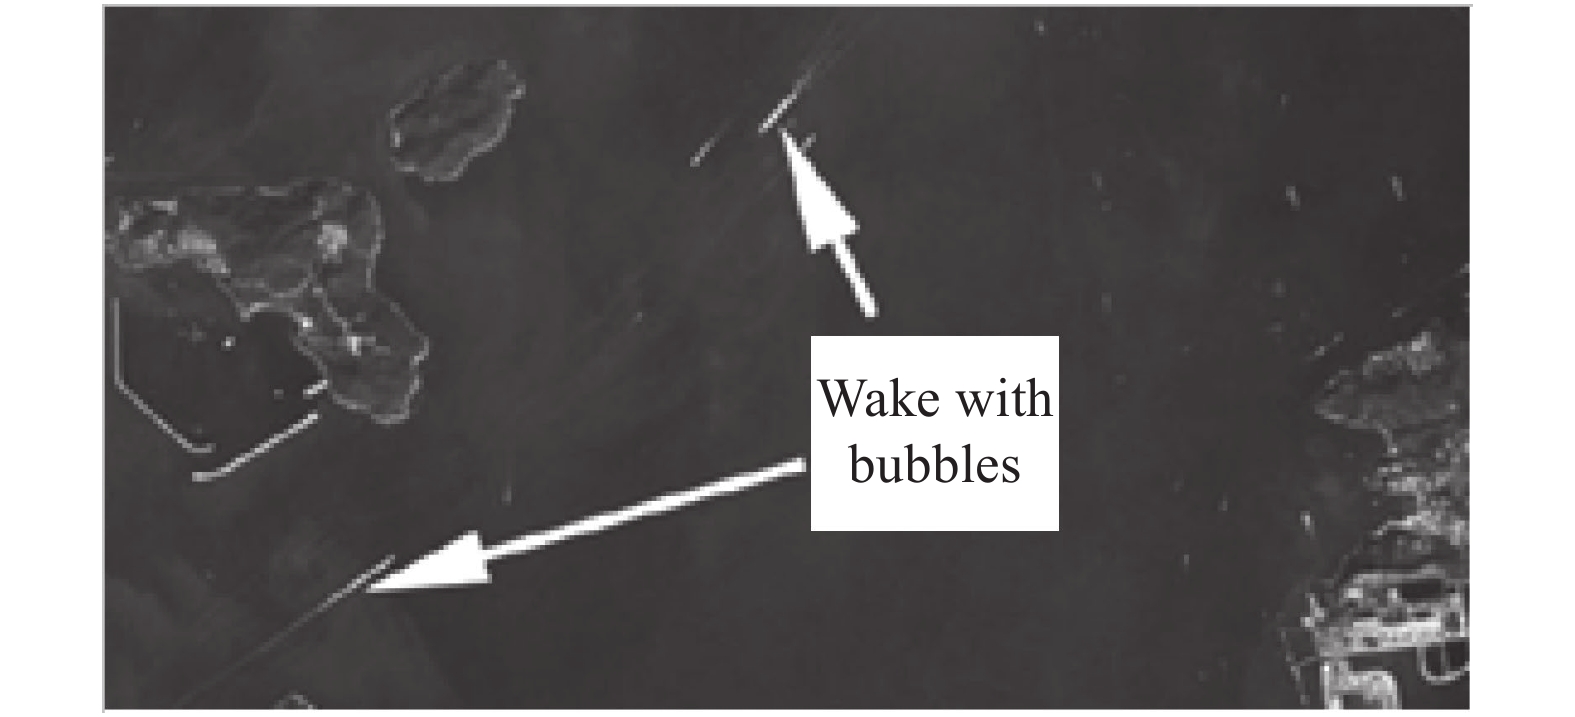 Optical remote sensing image of ship wake with bubbles